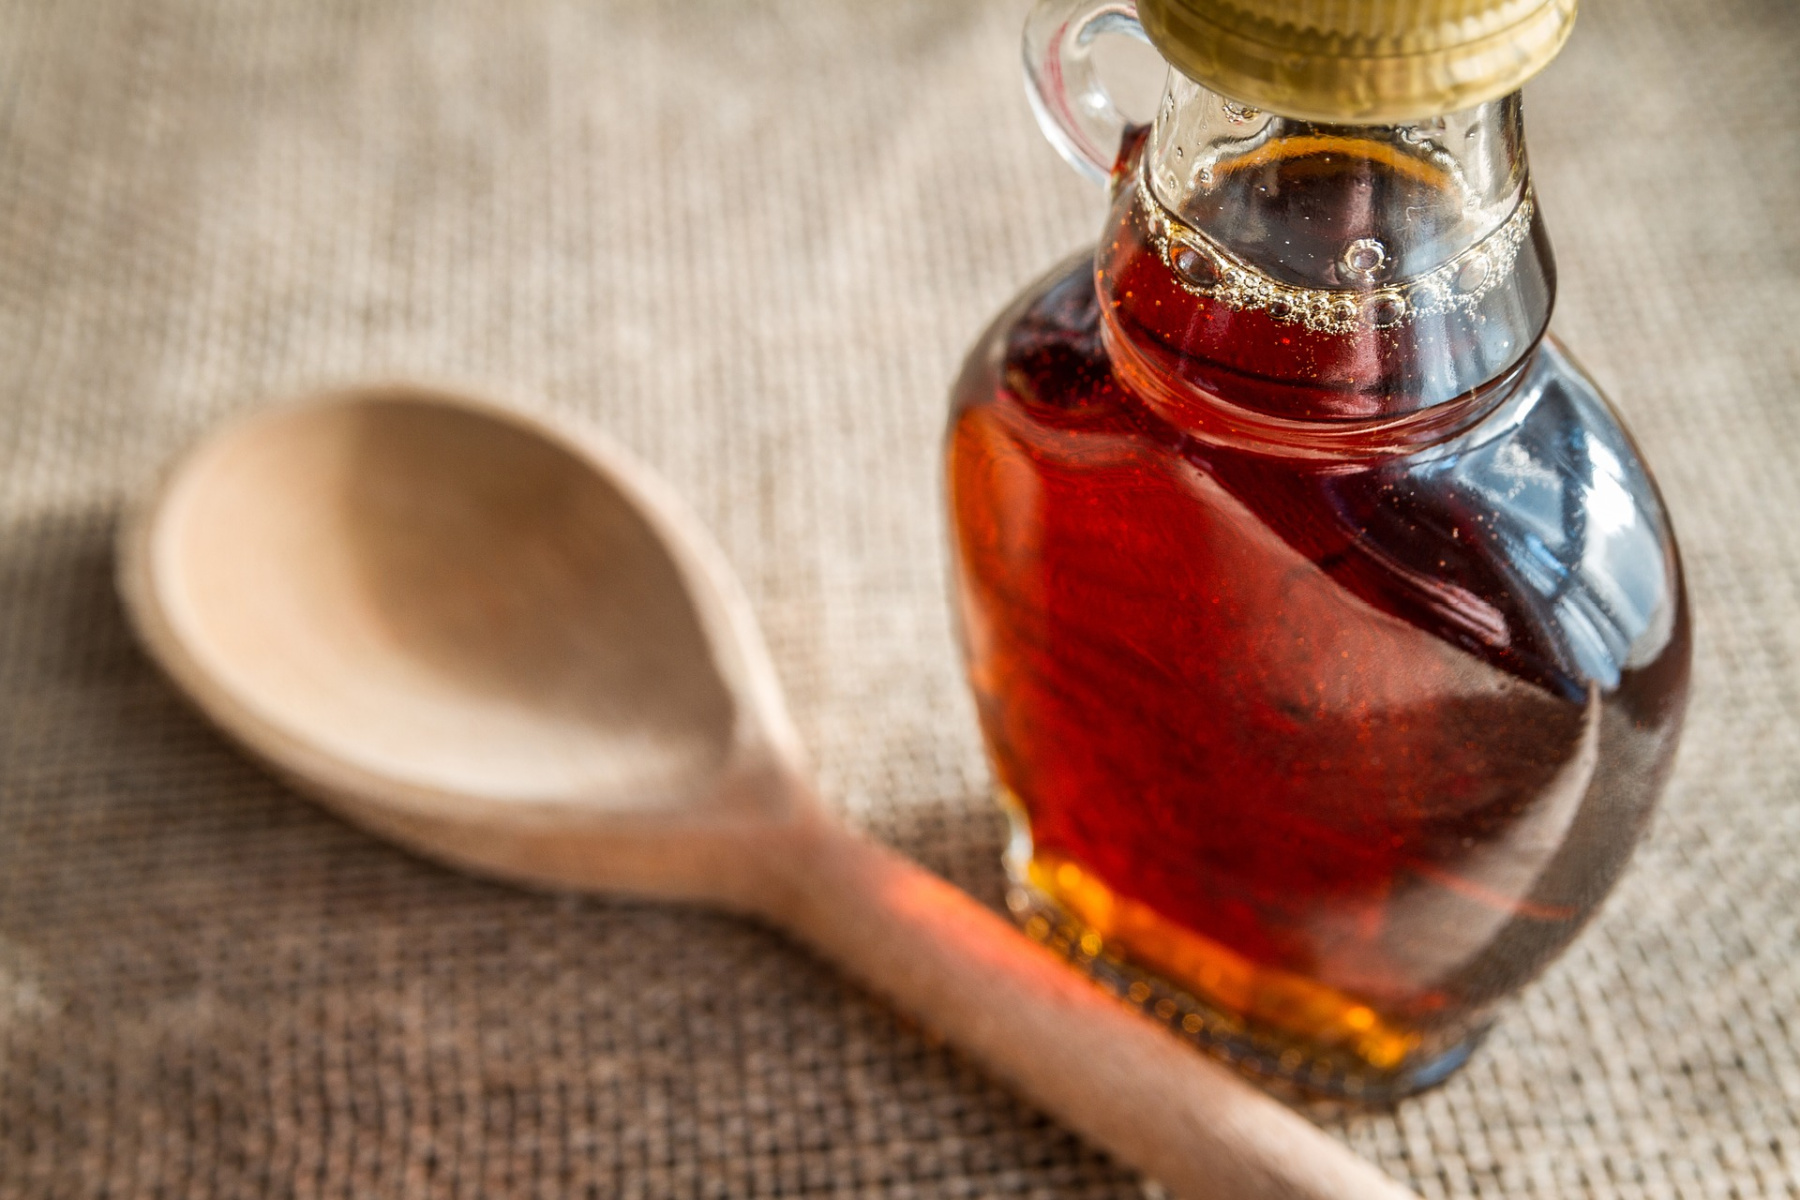 A glass bottle of maple syrup and a wooden spoon